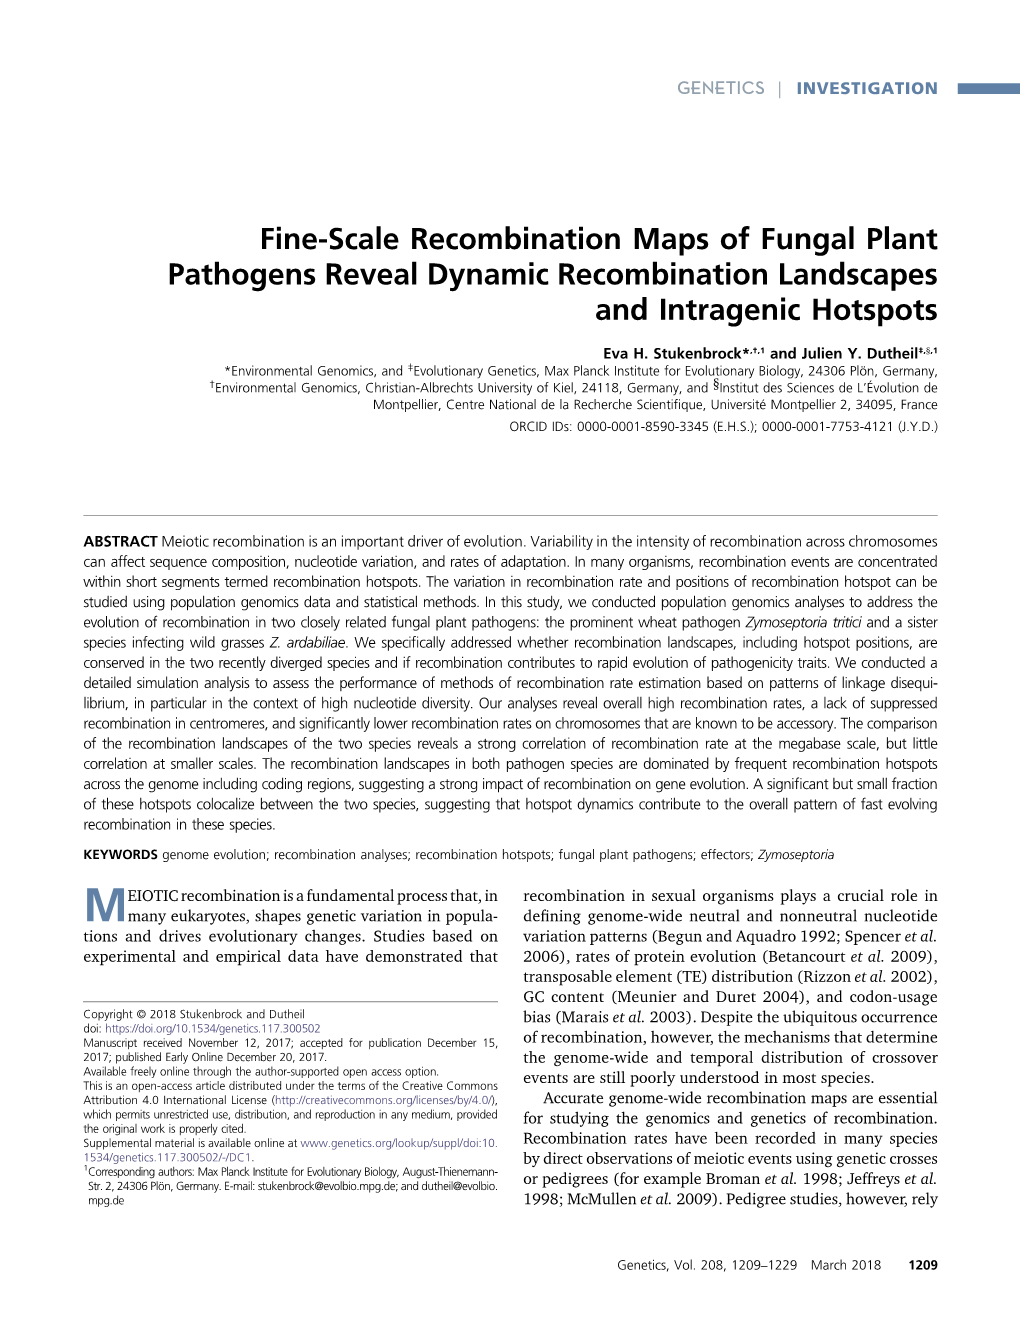 Fine-Scale Recombination Maps of Fungal Plant Pathogens Reveal Dynamic Recombination Landscapes and Intragenic Hotspots